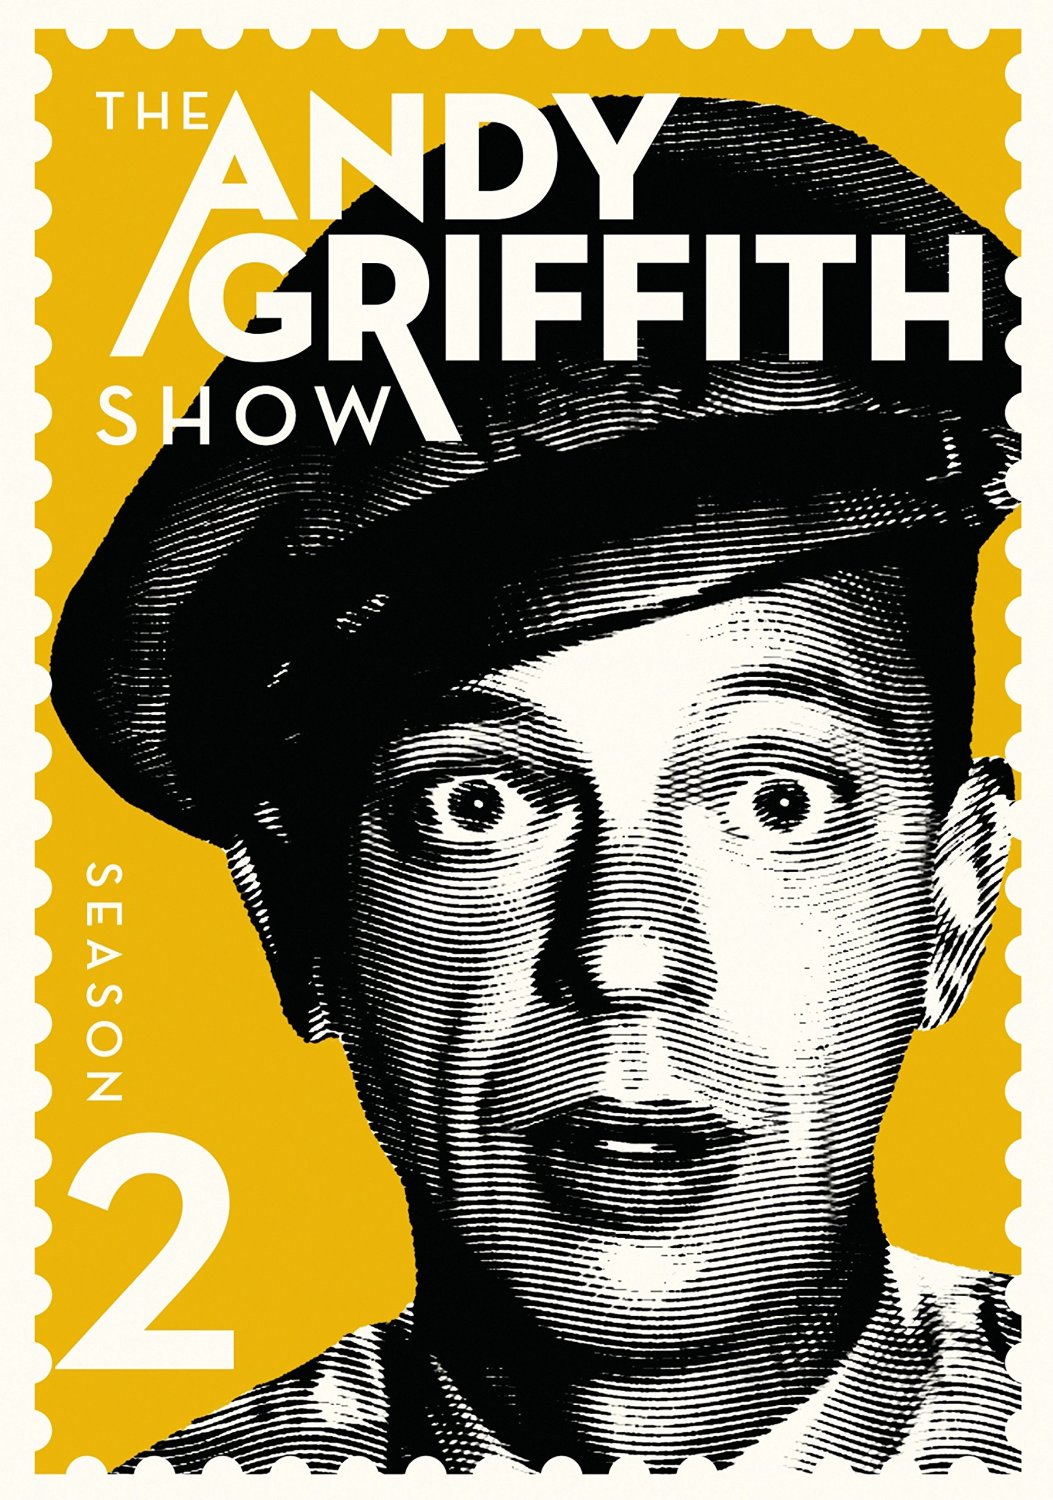 The Andy Griffith Show season 2 episode guide